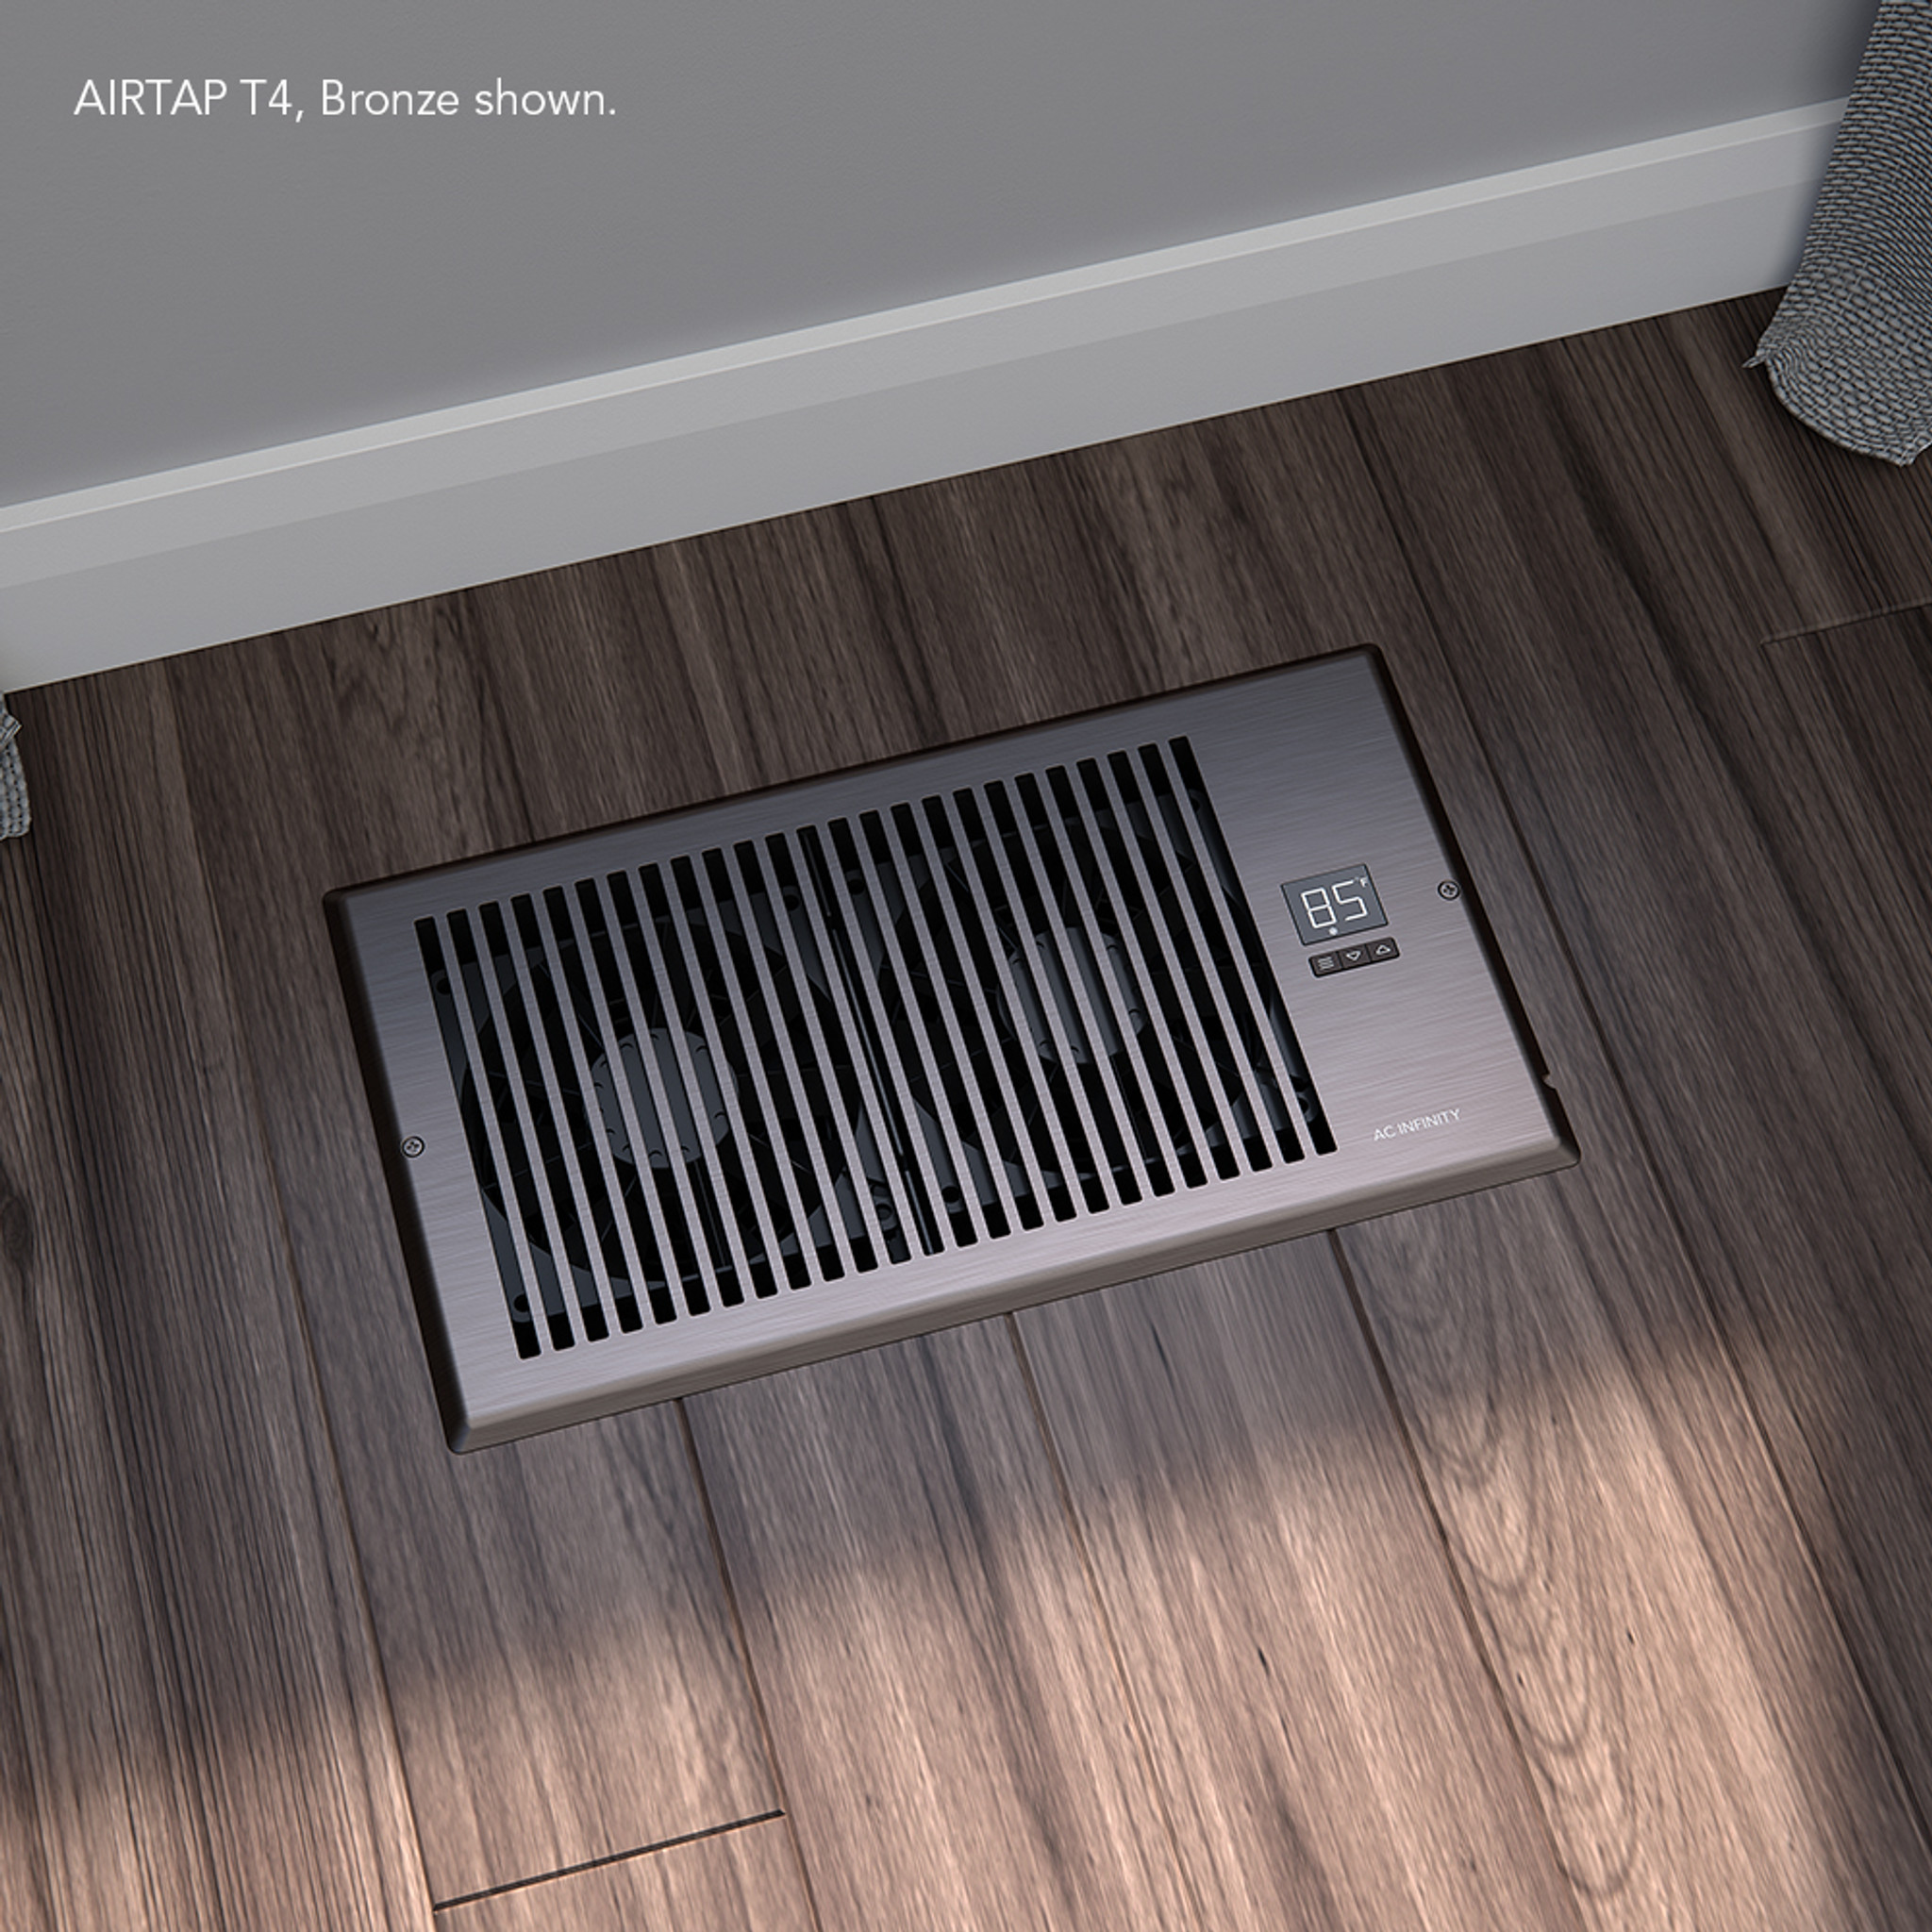 AIRTAP T4, Quiet Register Booster Fan System, Brown Bronze, for 4